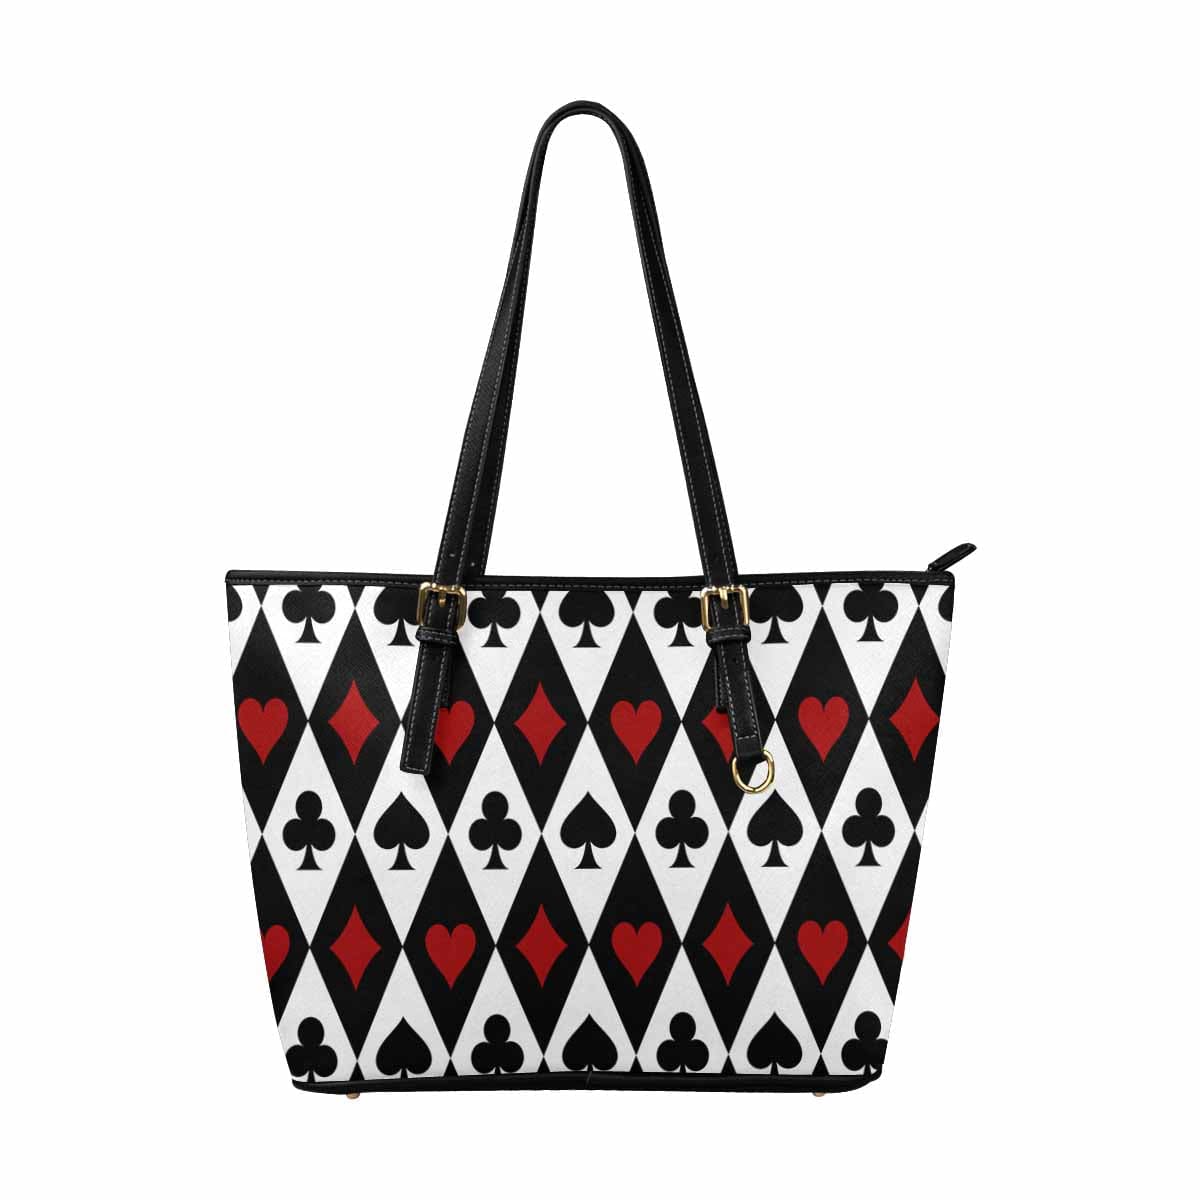 Large Leather Tote Shoulder Bag - Red - Bags | Leather Tote Bags